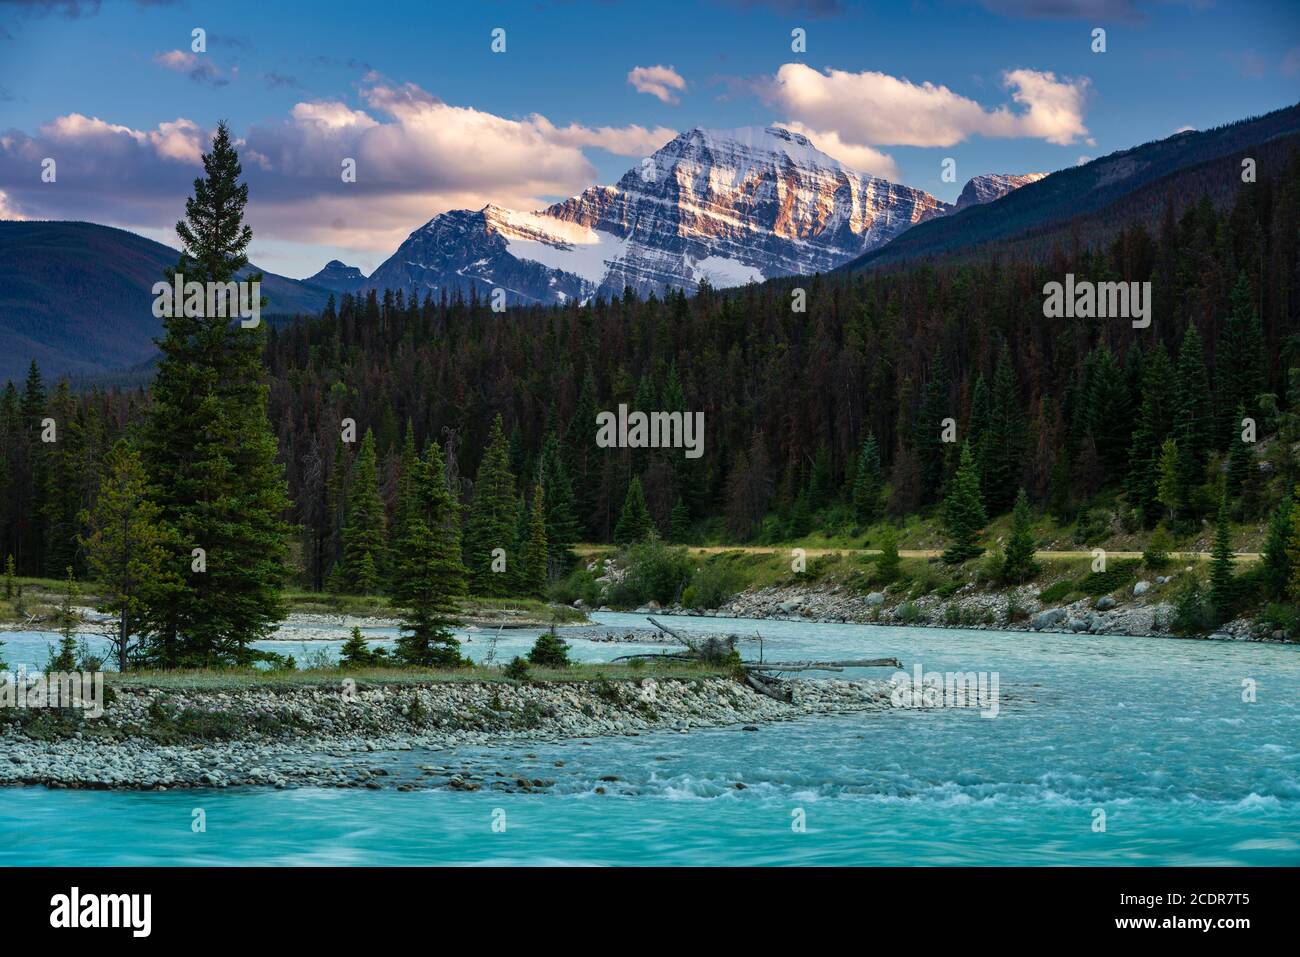 Mount Edith Cavell and the Athabasca  River in Jasper National Park, Alberta, Canada. Stock Photo